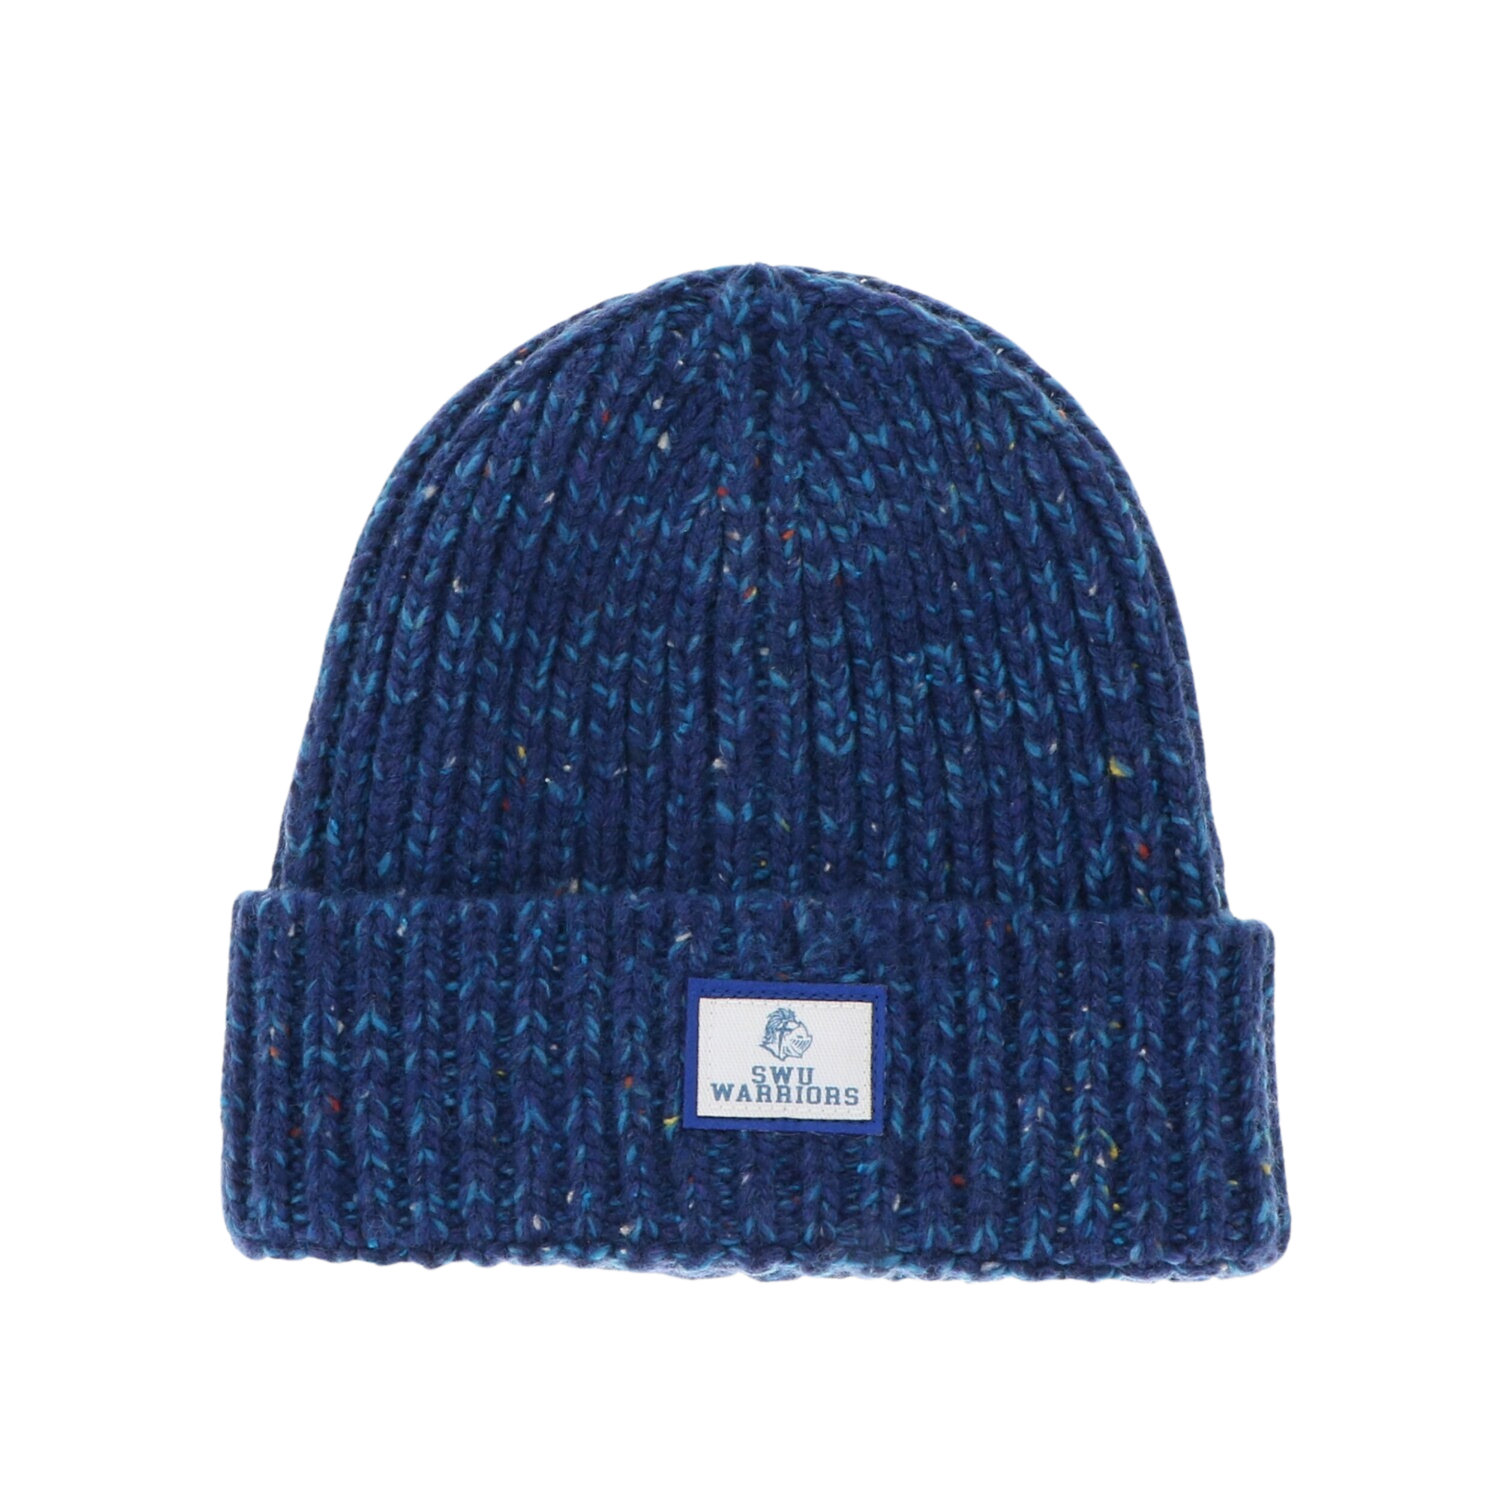 L2 Speckled Beanie - Royal